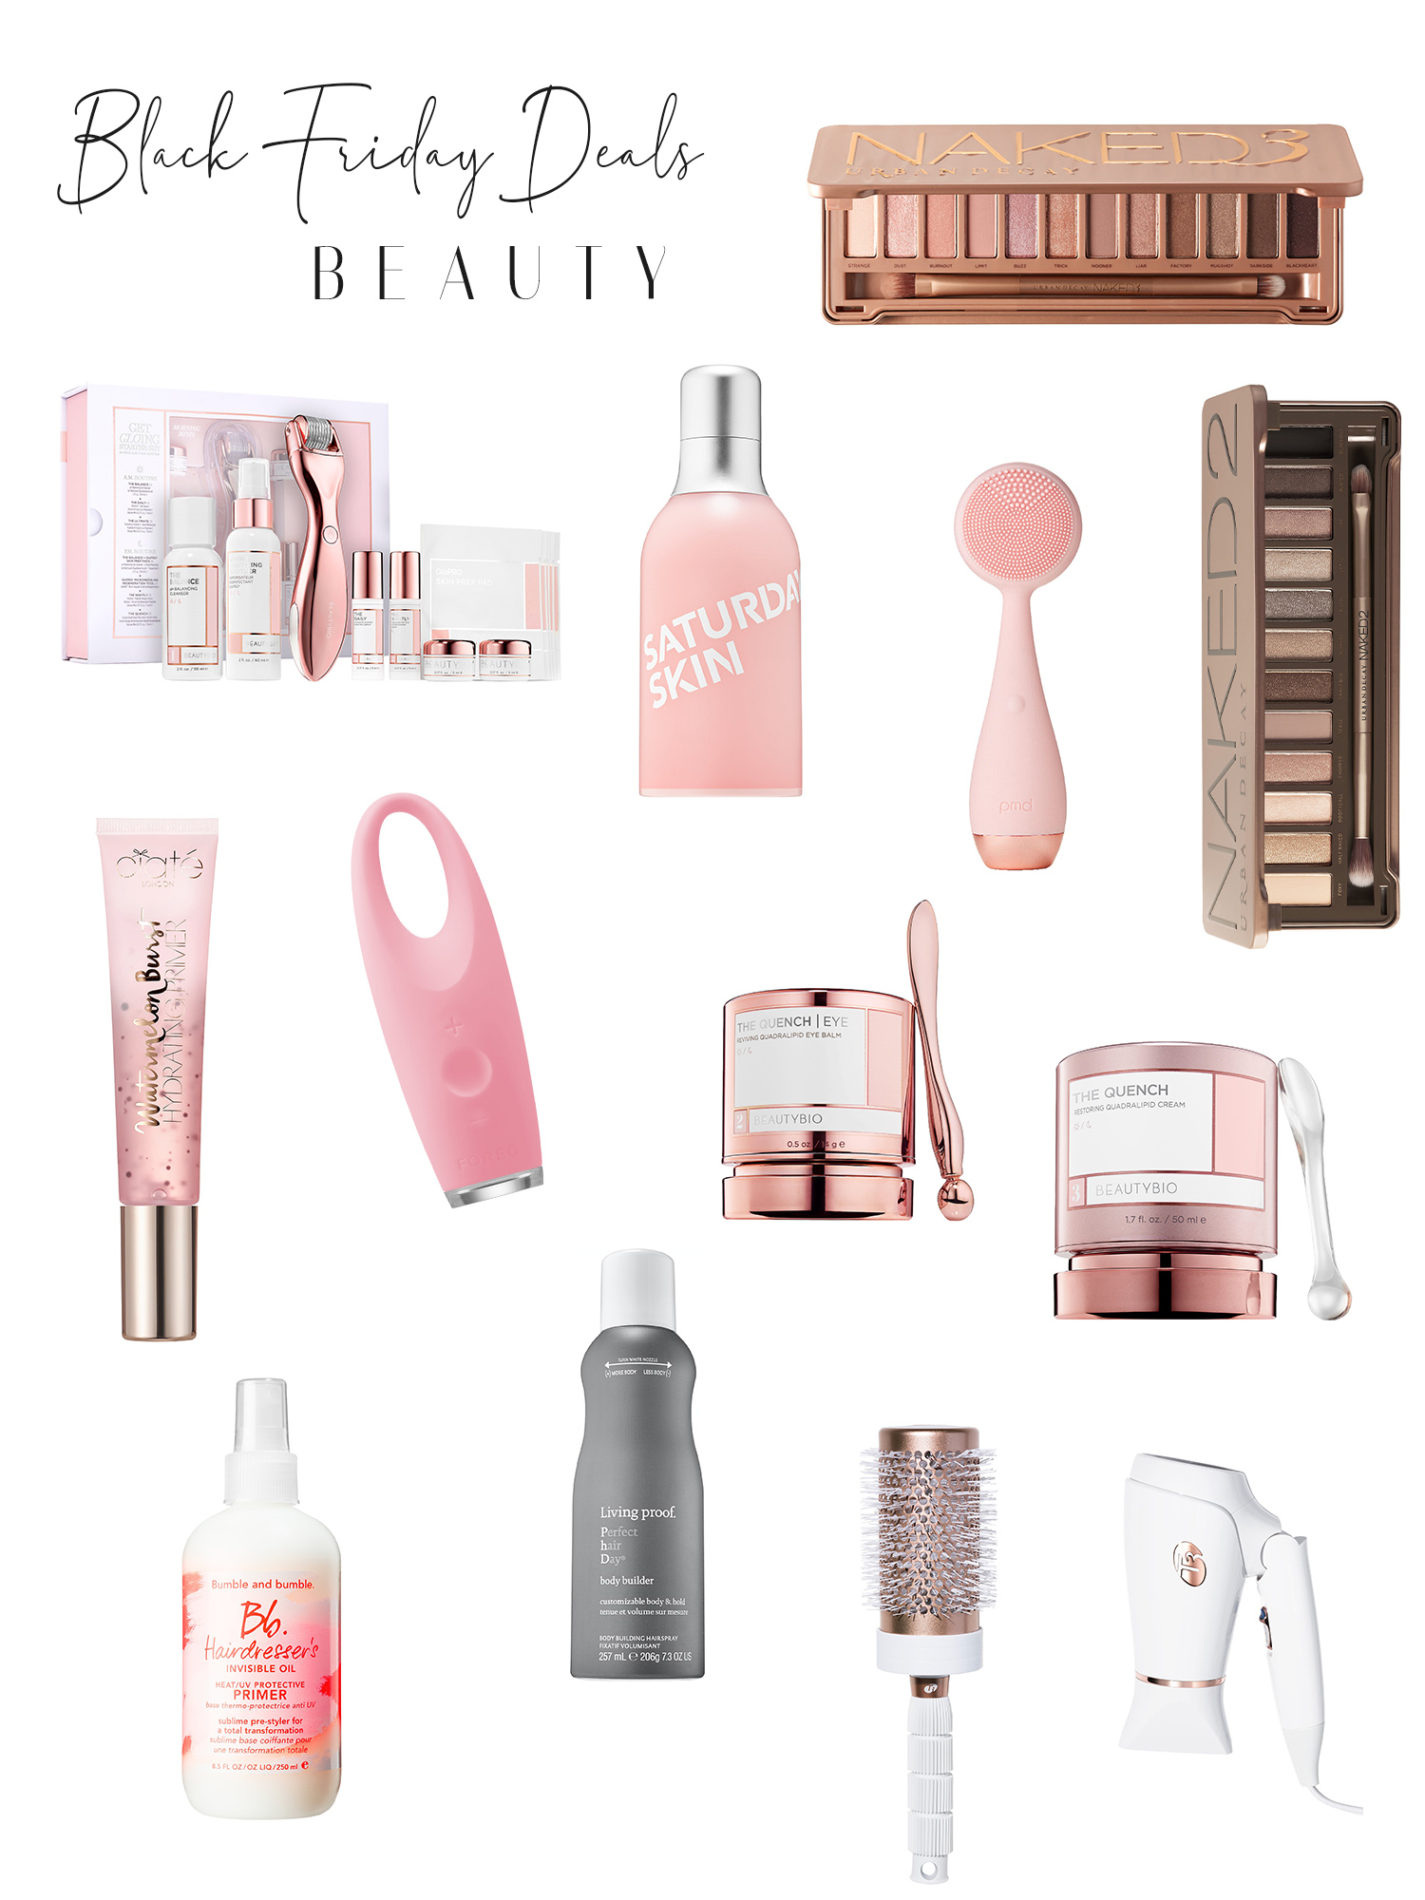 Black Friday 2019 | Beauty Deals | Blondie in the City by Hayley Larue